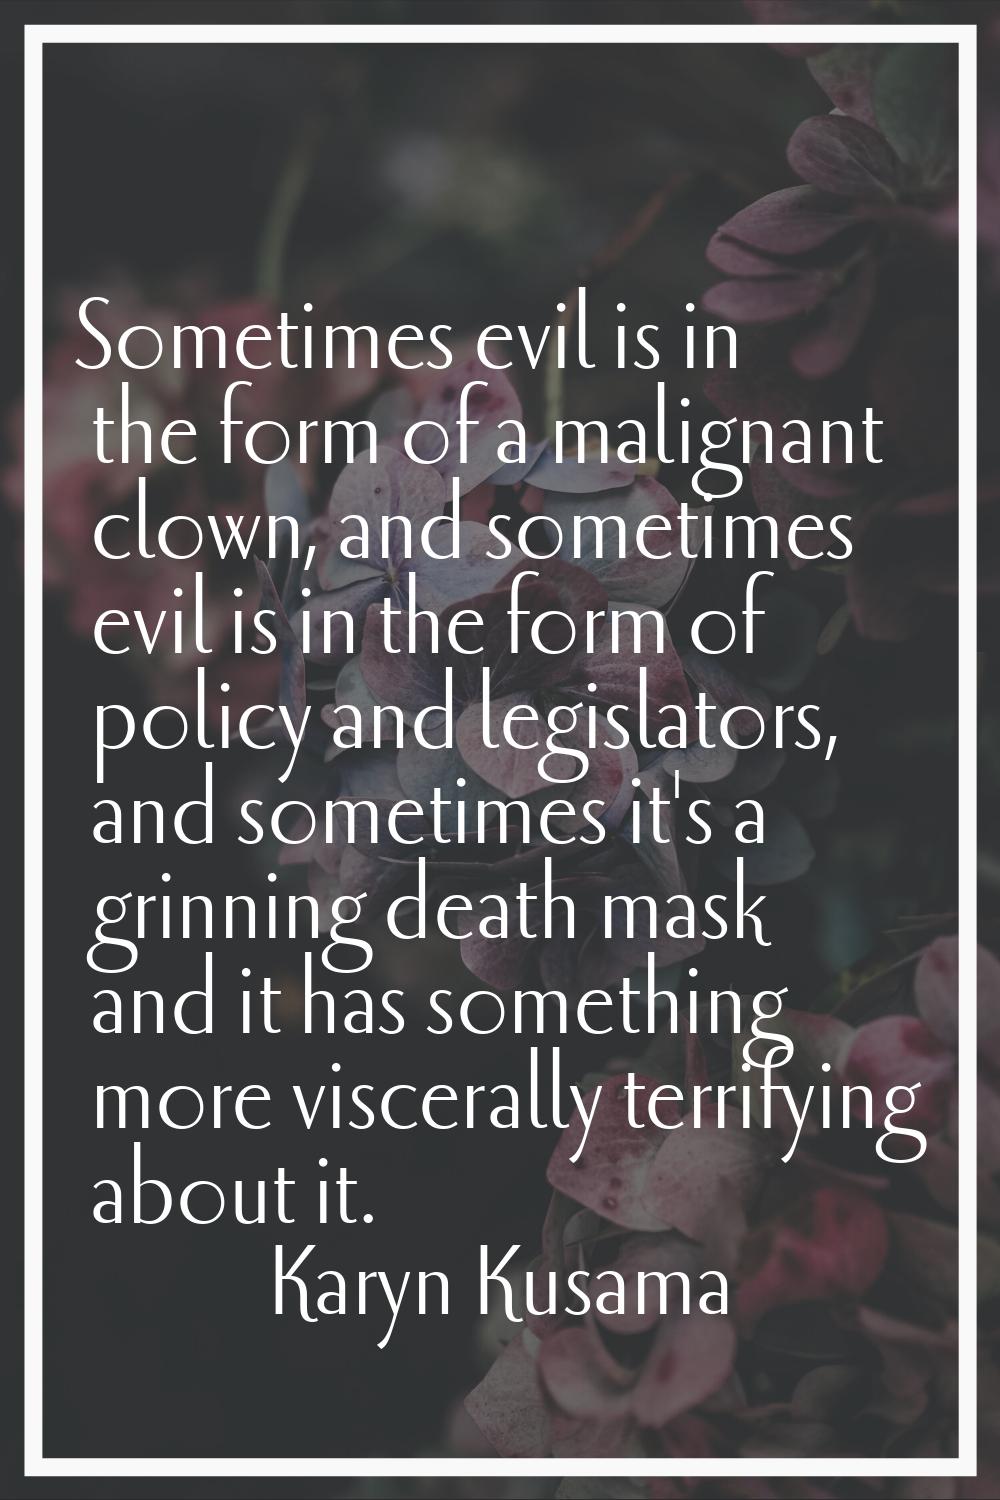 Sometimes evil is in the form of a malignant clown, and sometimes evil is in the form of policy and